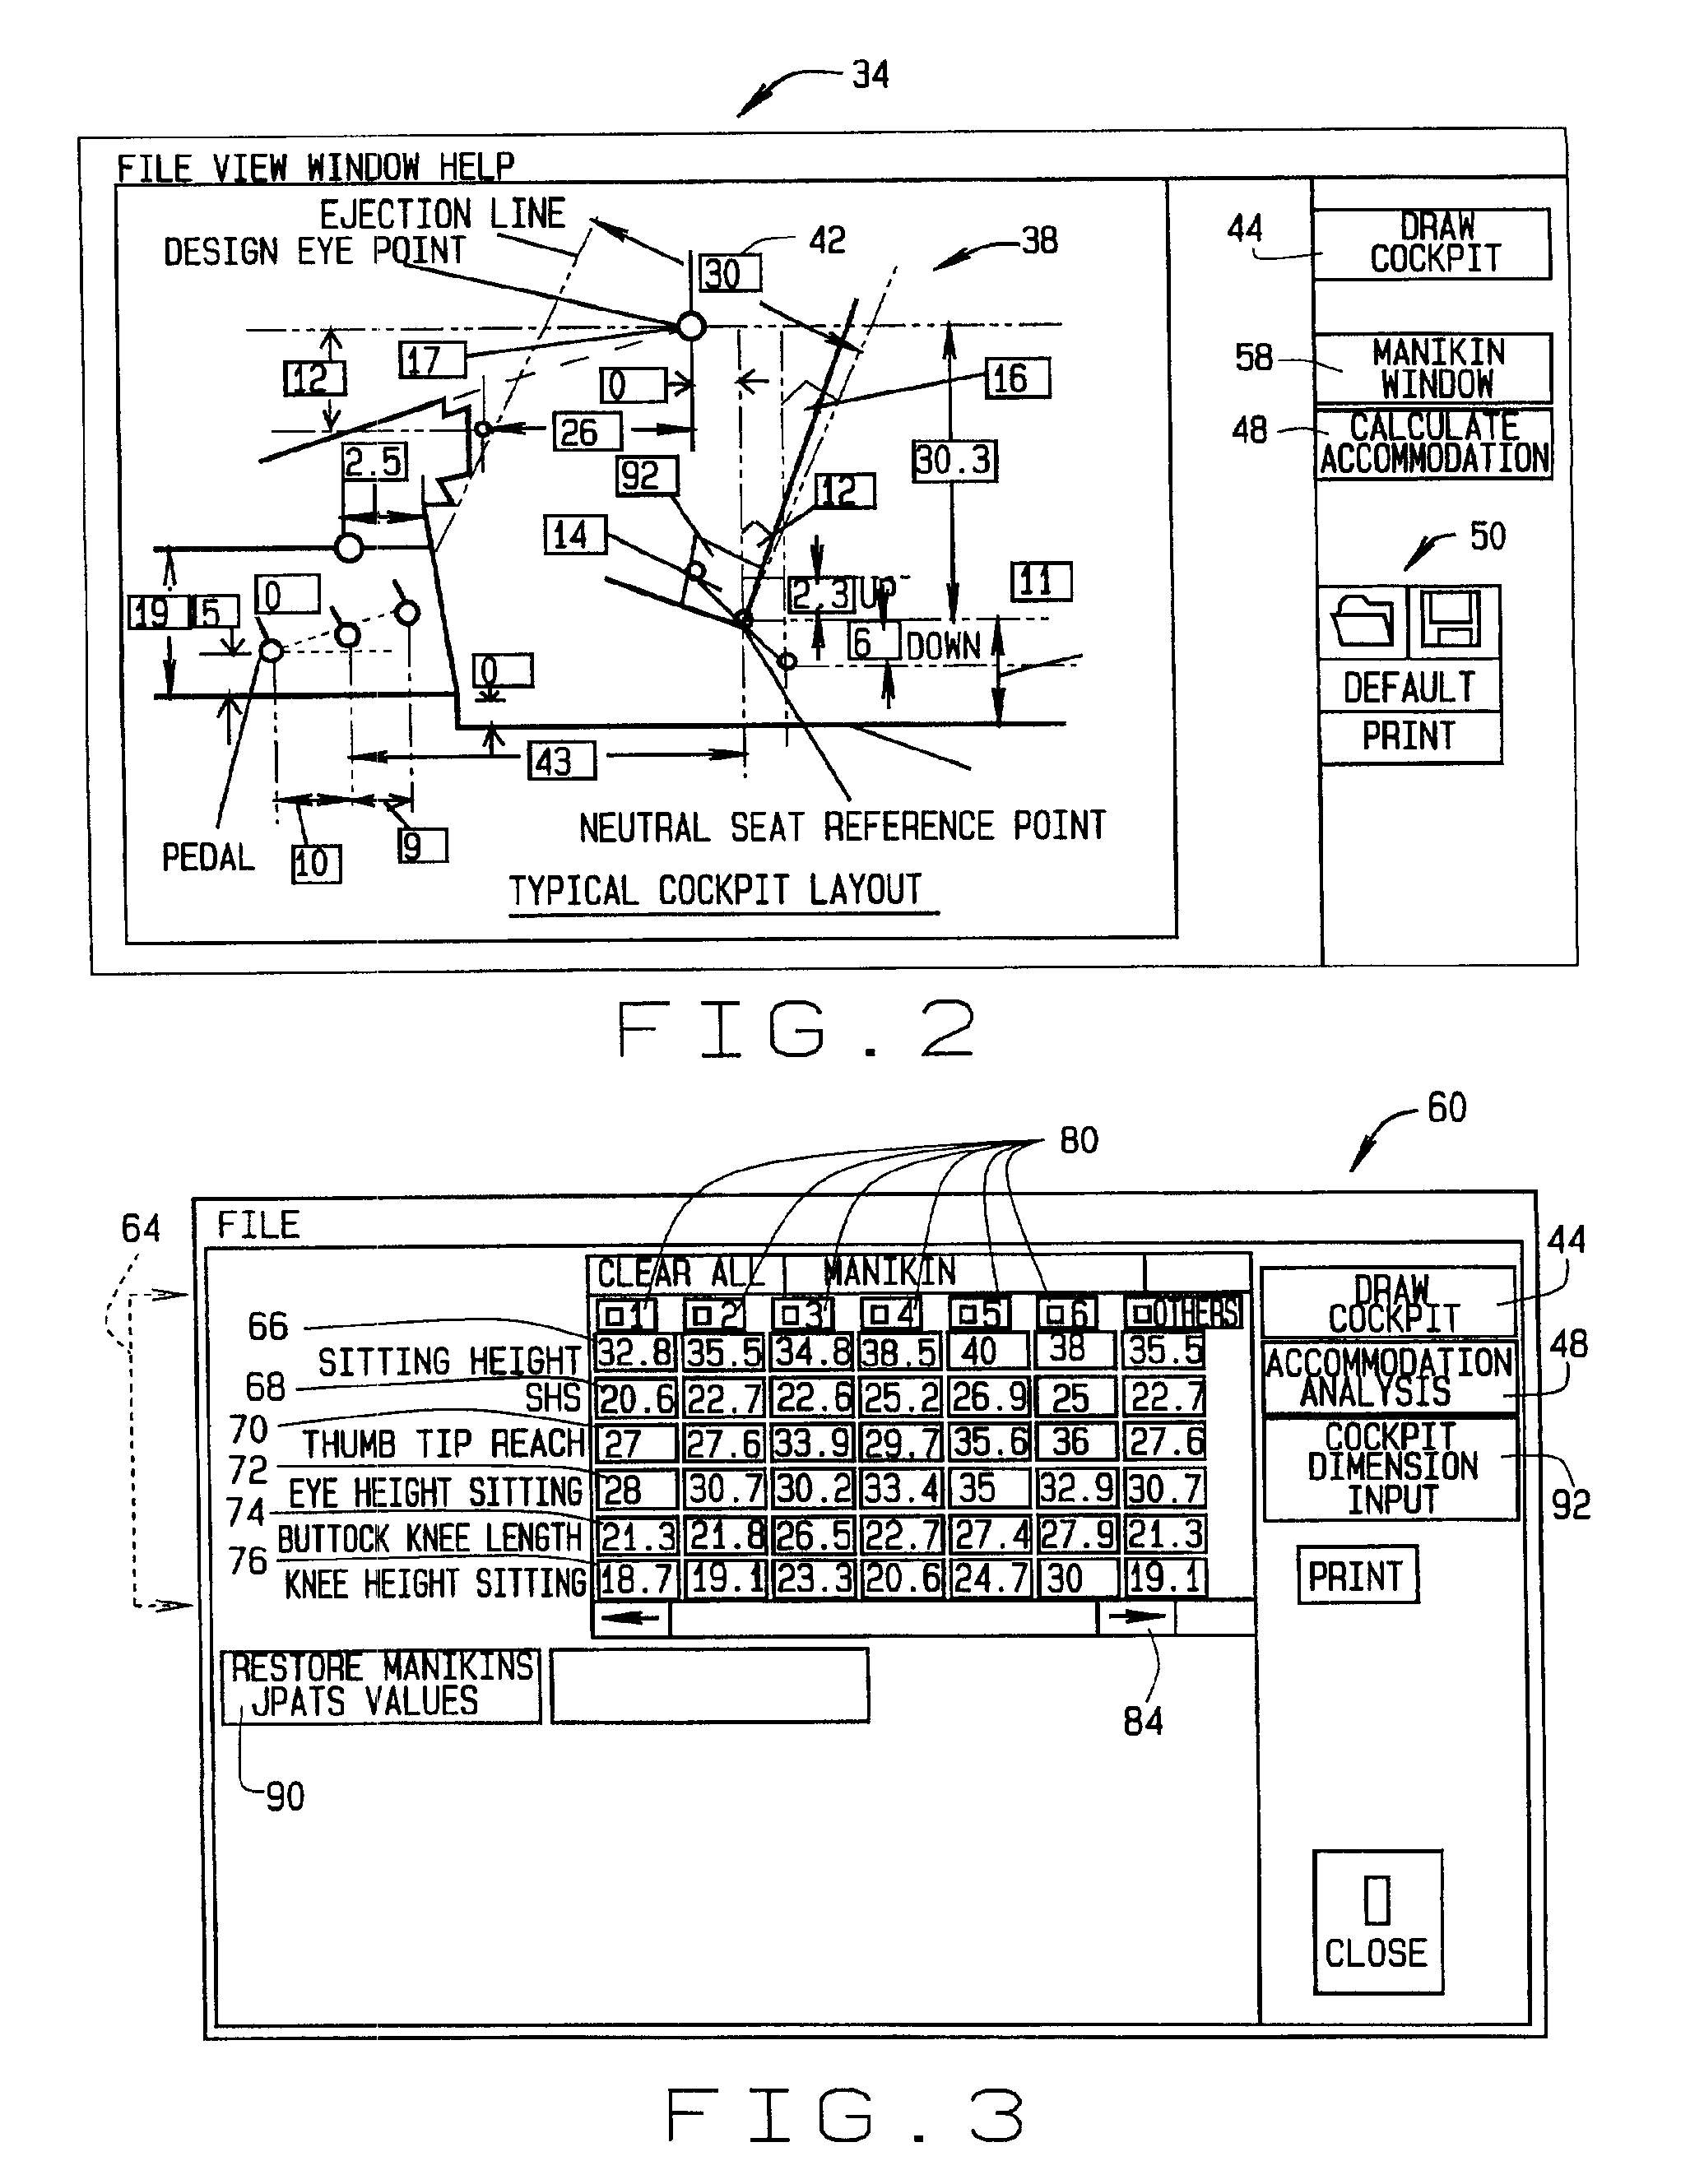 Apparatus and methods for virtual accommodation